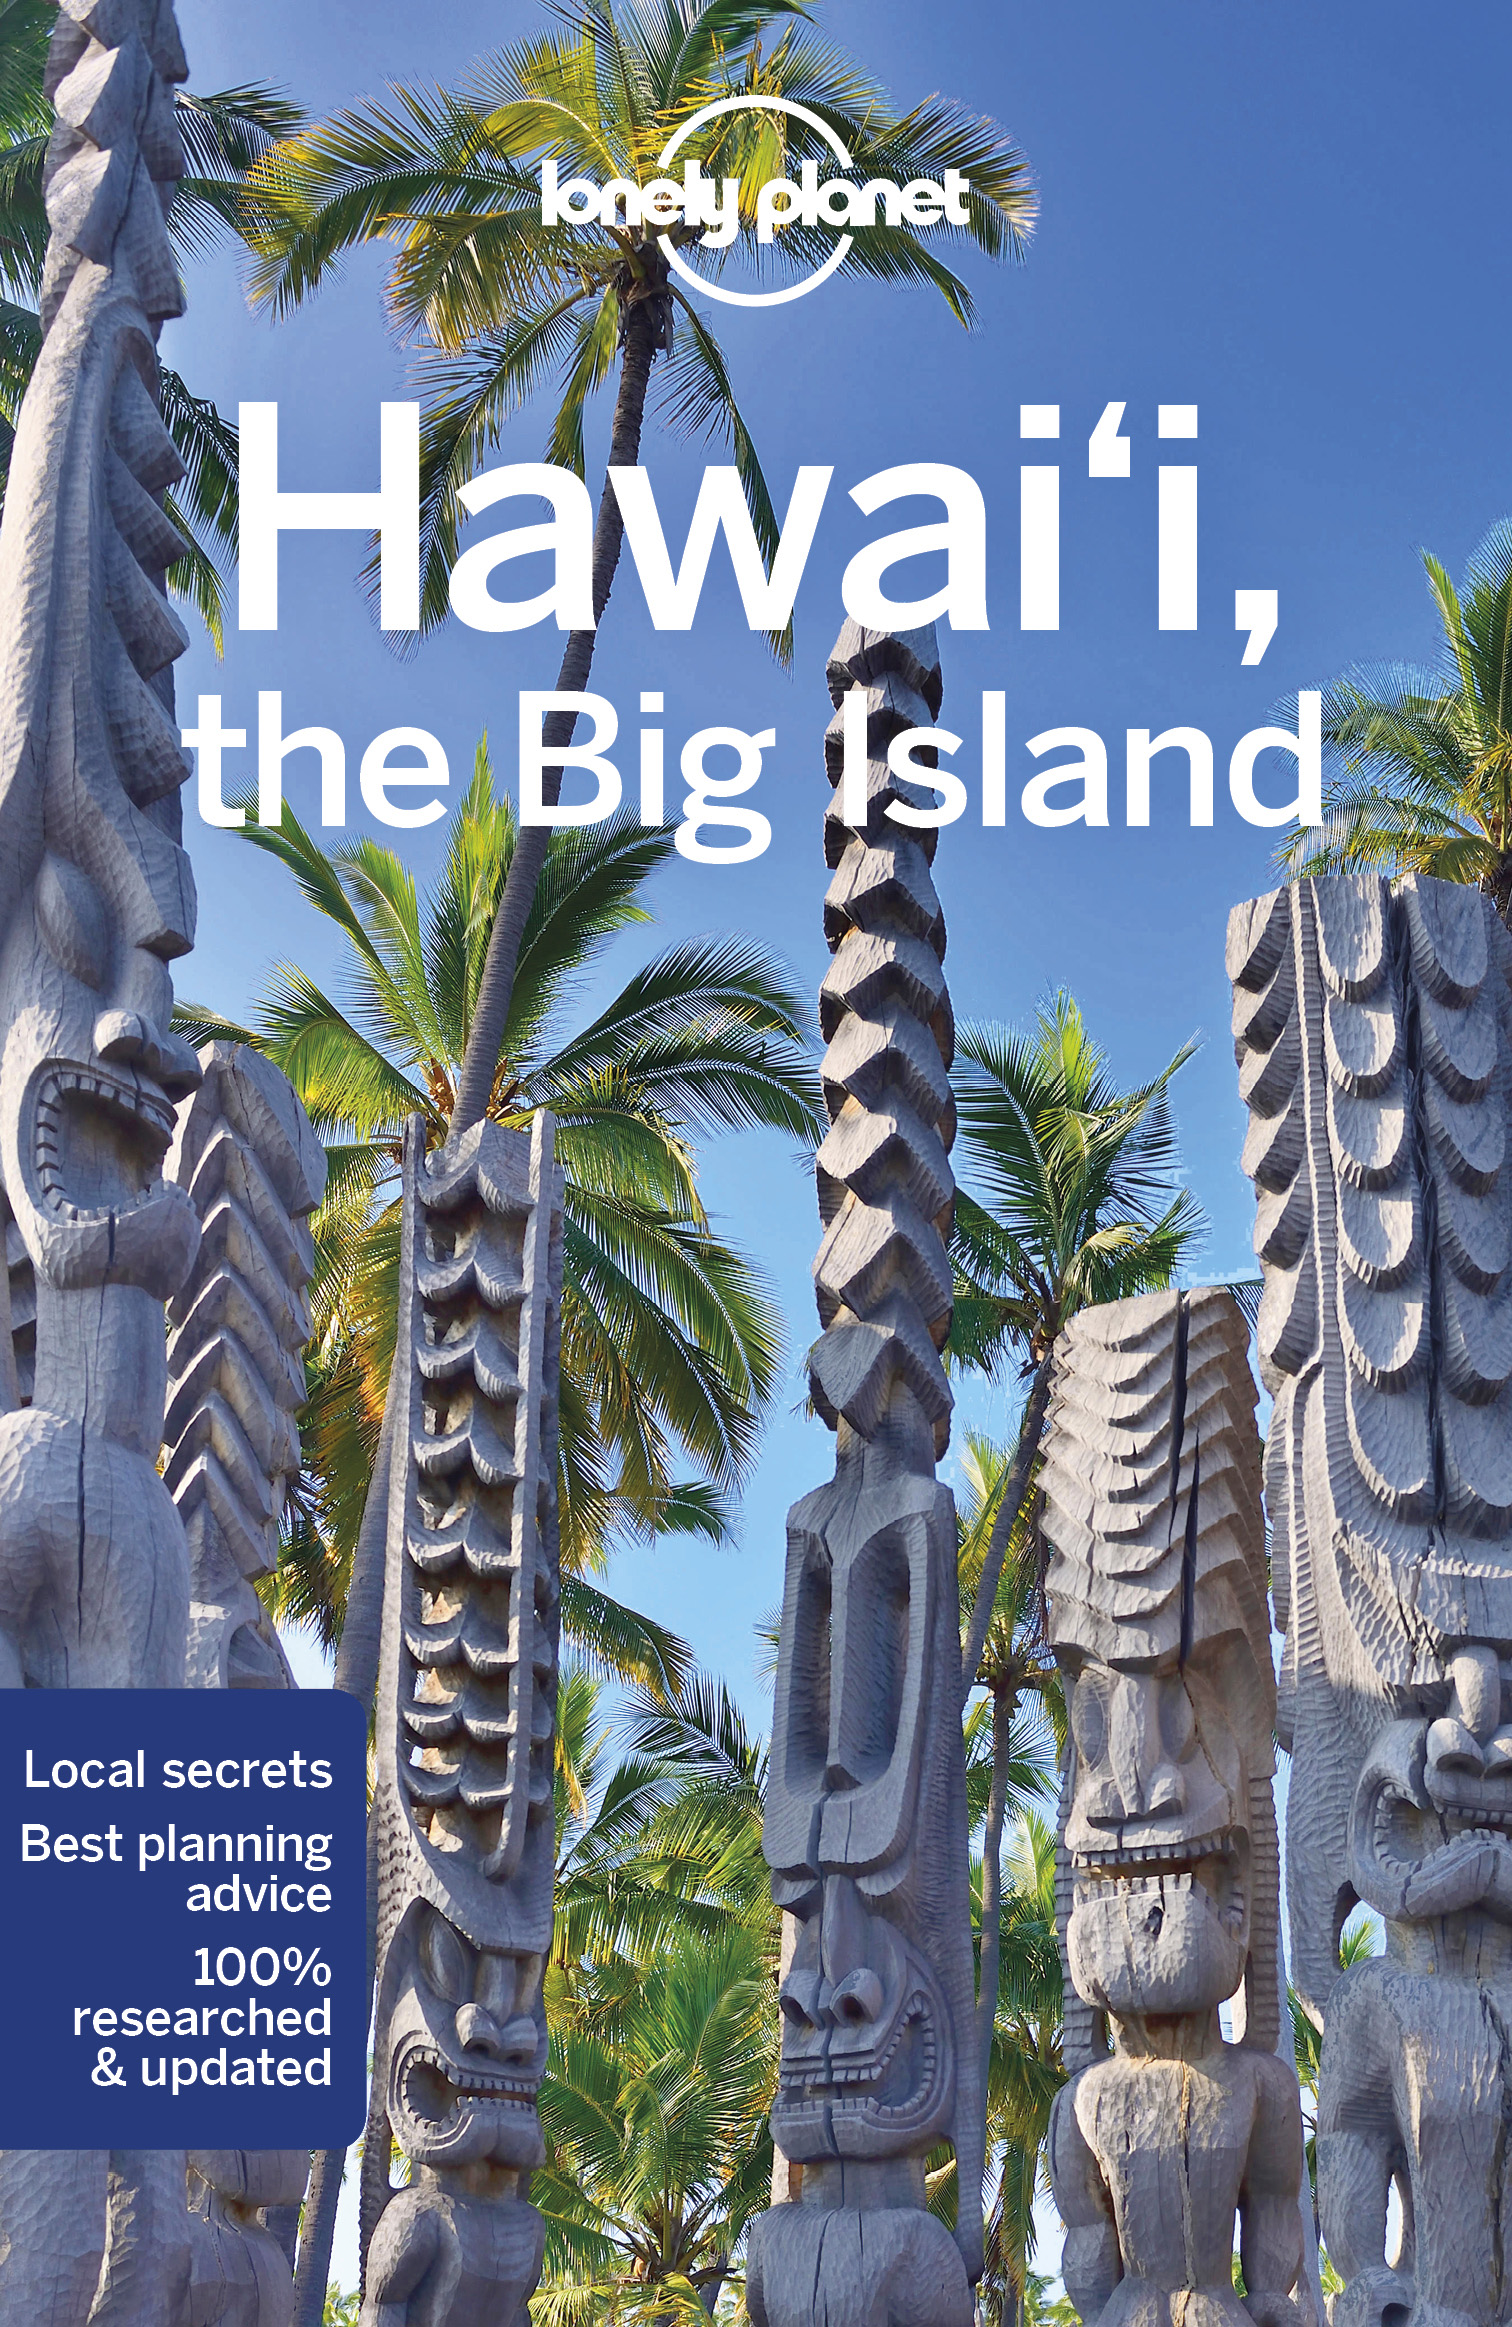 průvodce Hawaii,the Big Island 5.edice anglicky Lonely Planet